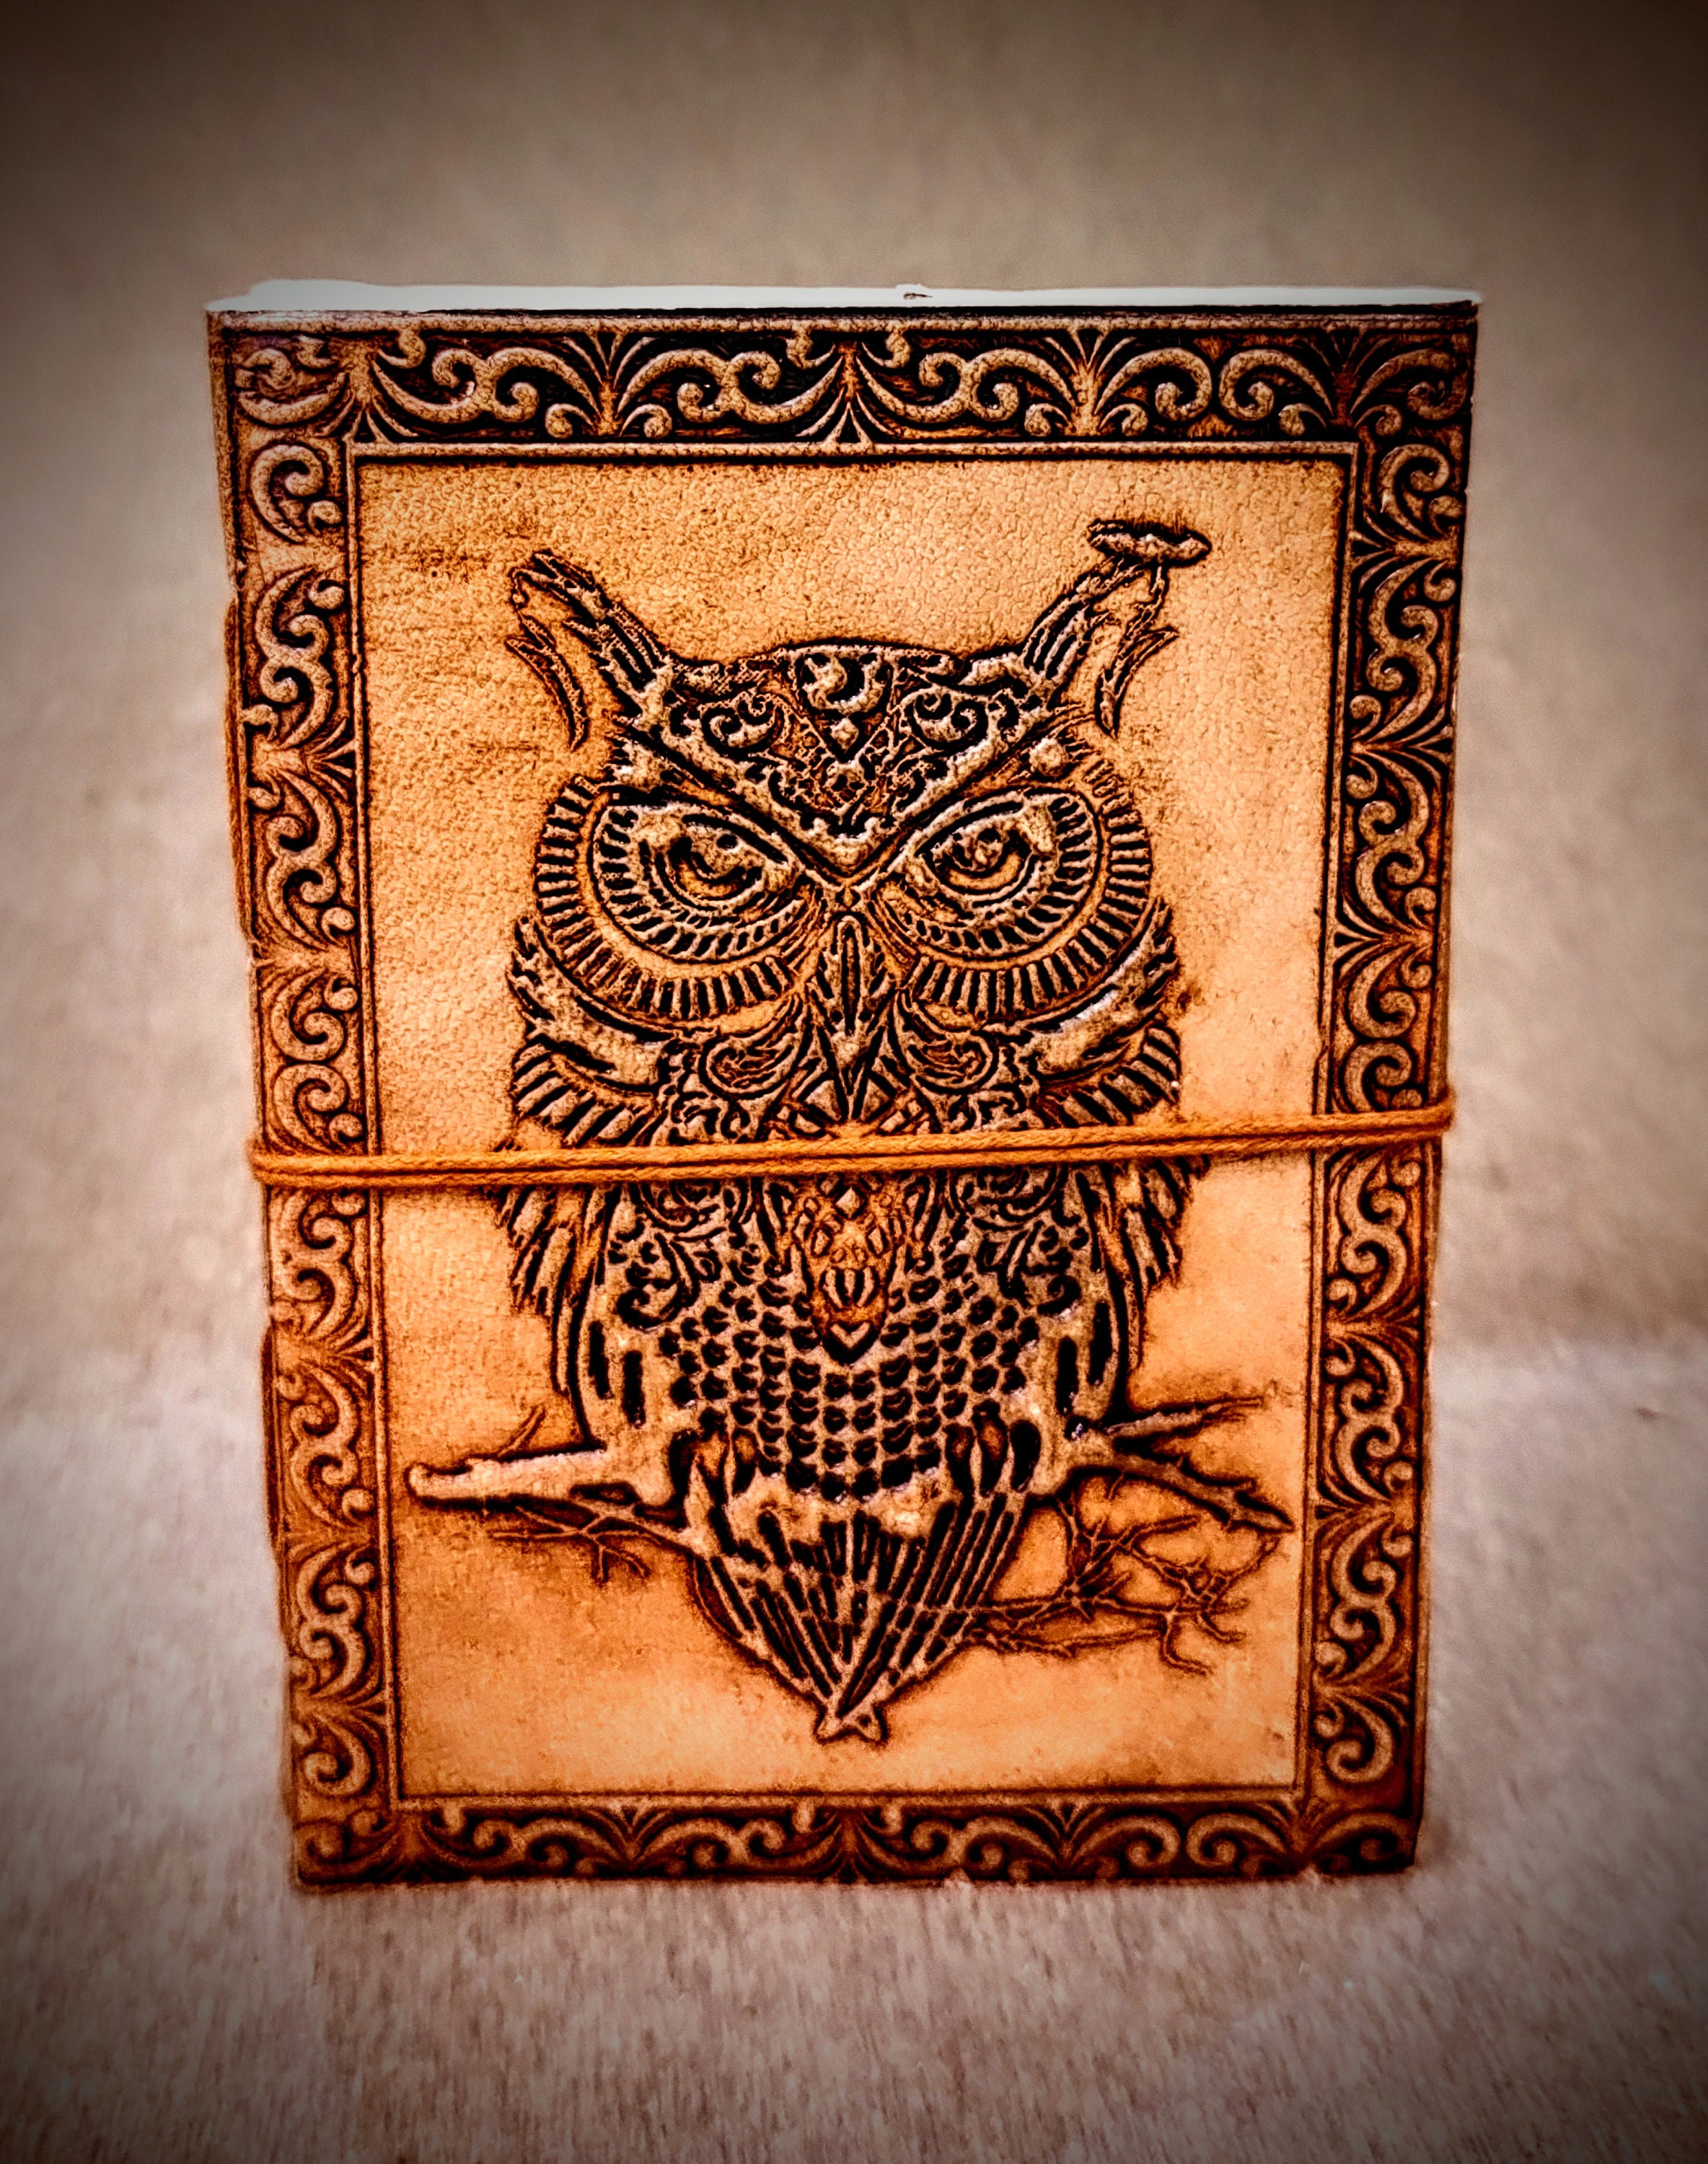 Fearless Owl - Tree of Life Embossed Handcrafted Leather Bound Journal,Brown Medium Size Stitched No